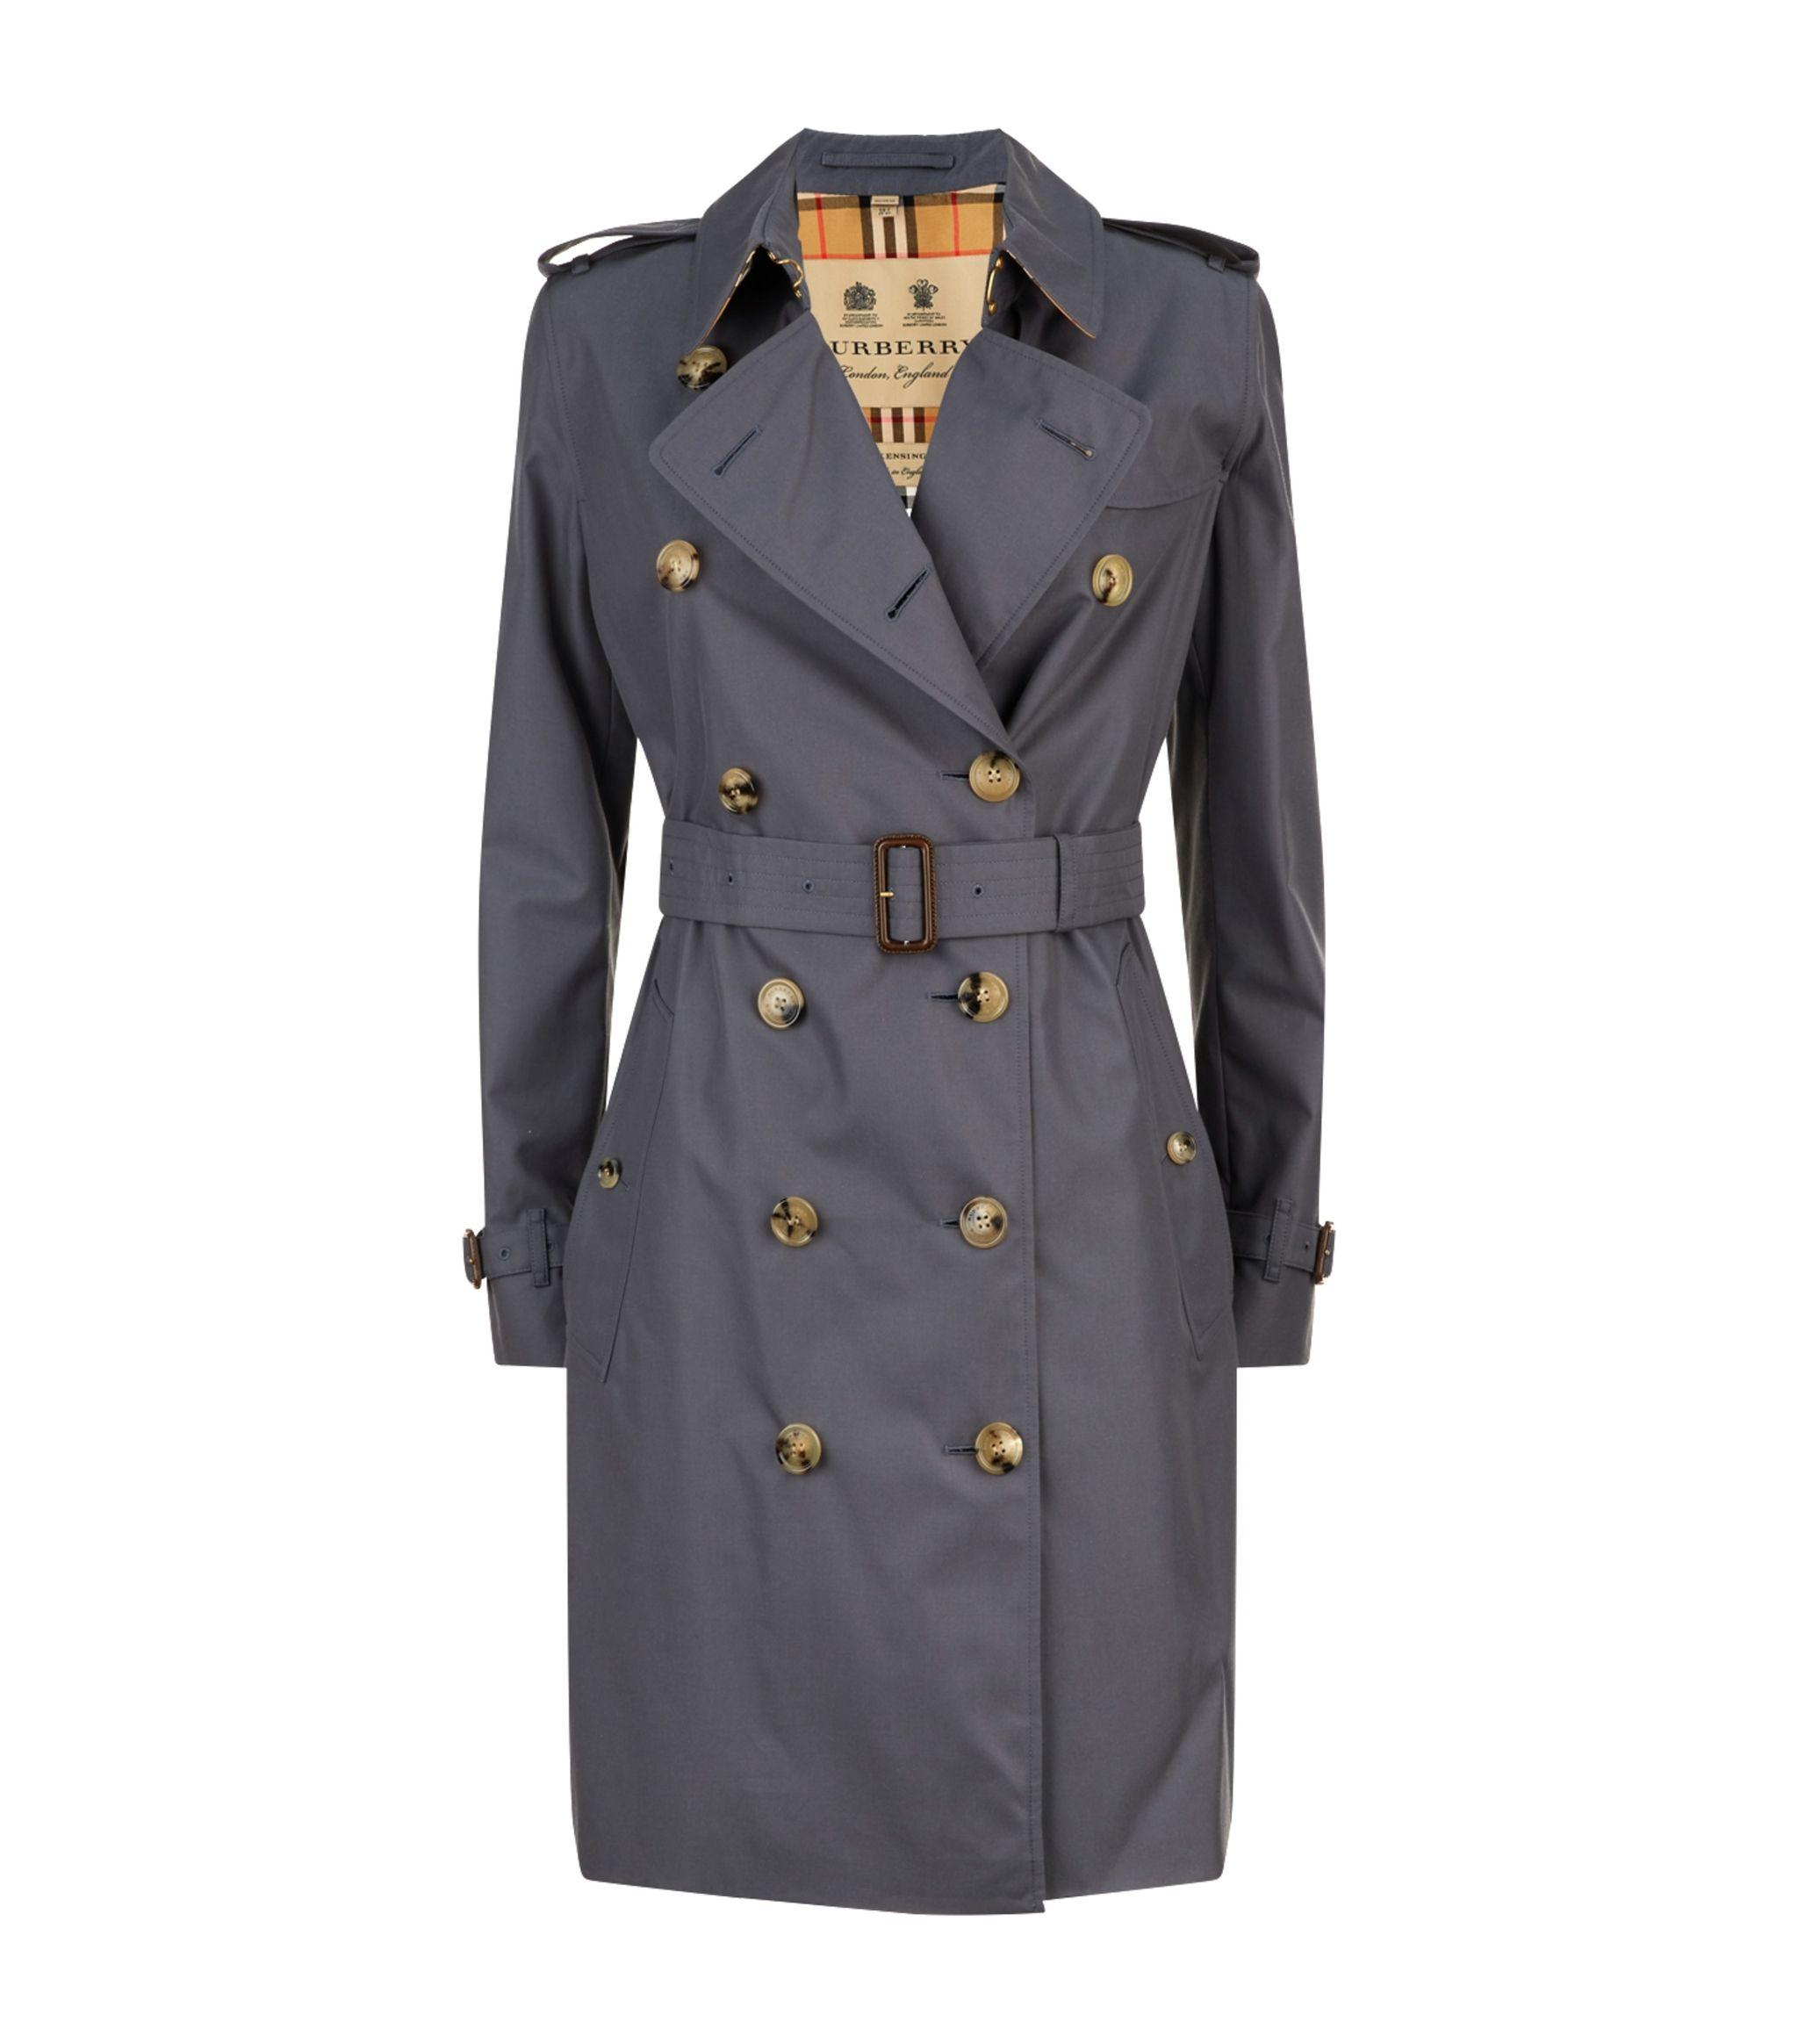 Burberry Cotton Kensington Heritage Trench Coat in Gray - Lyst